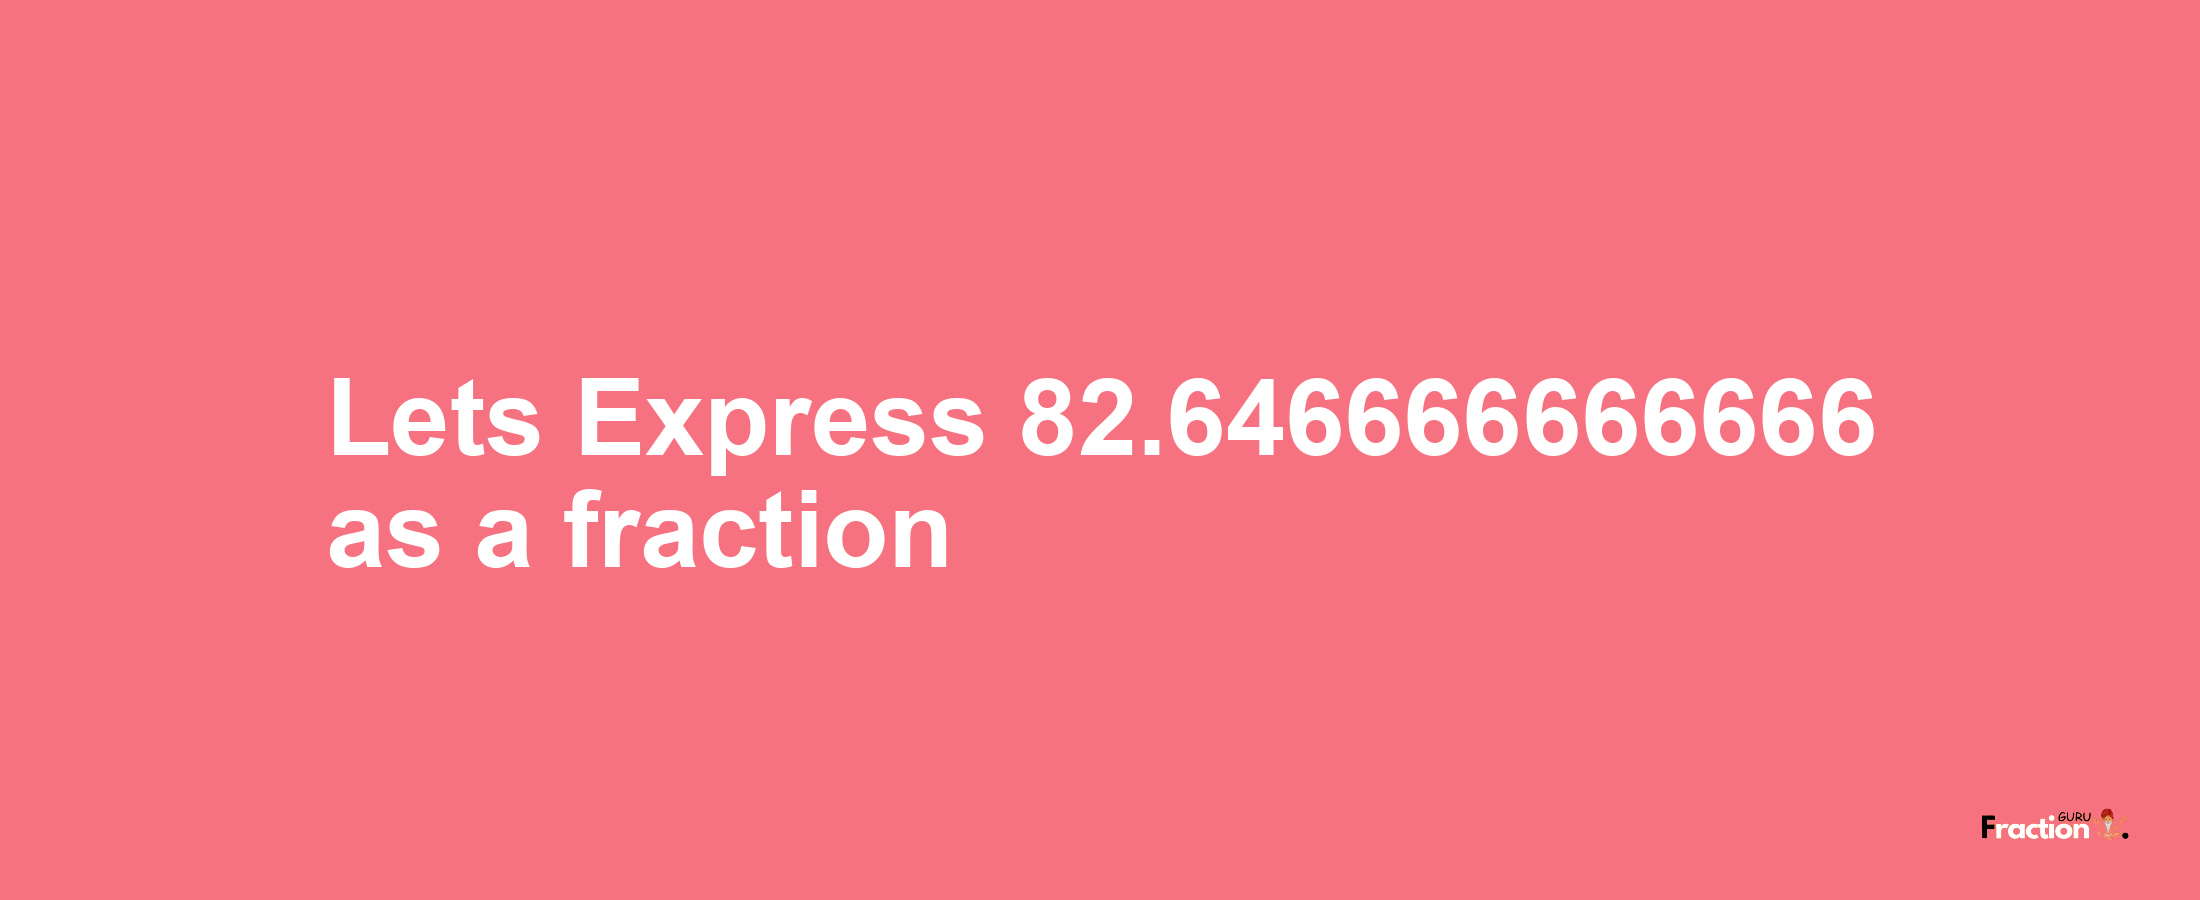 Lets Express 82.646666666666 as afraction